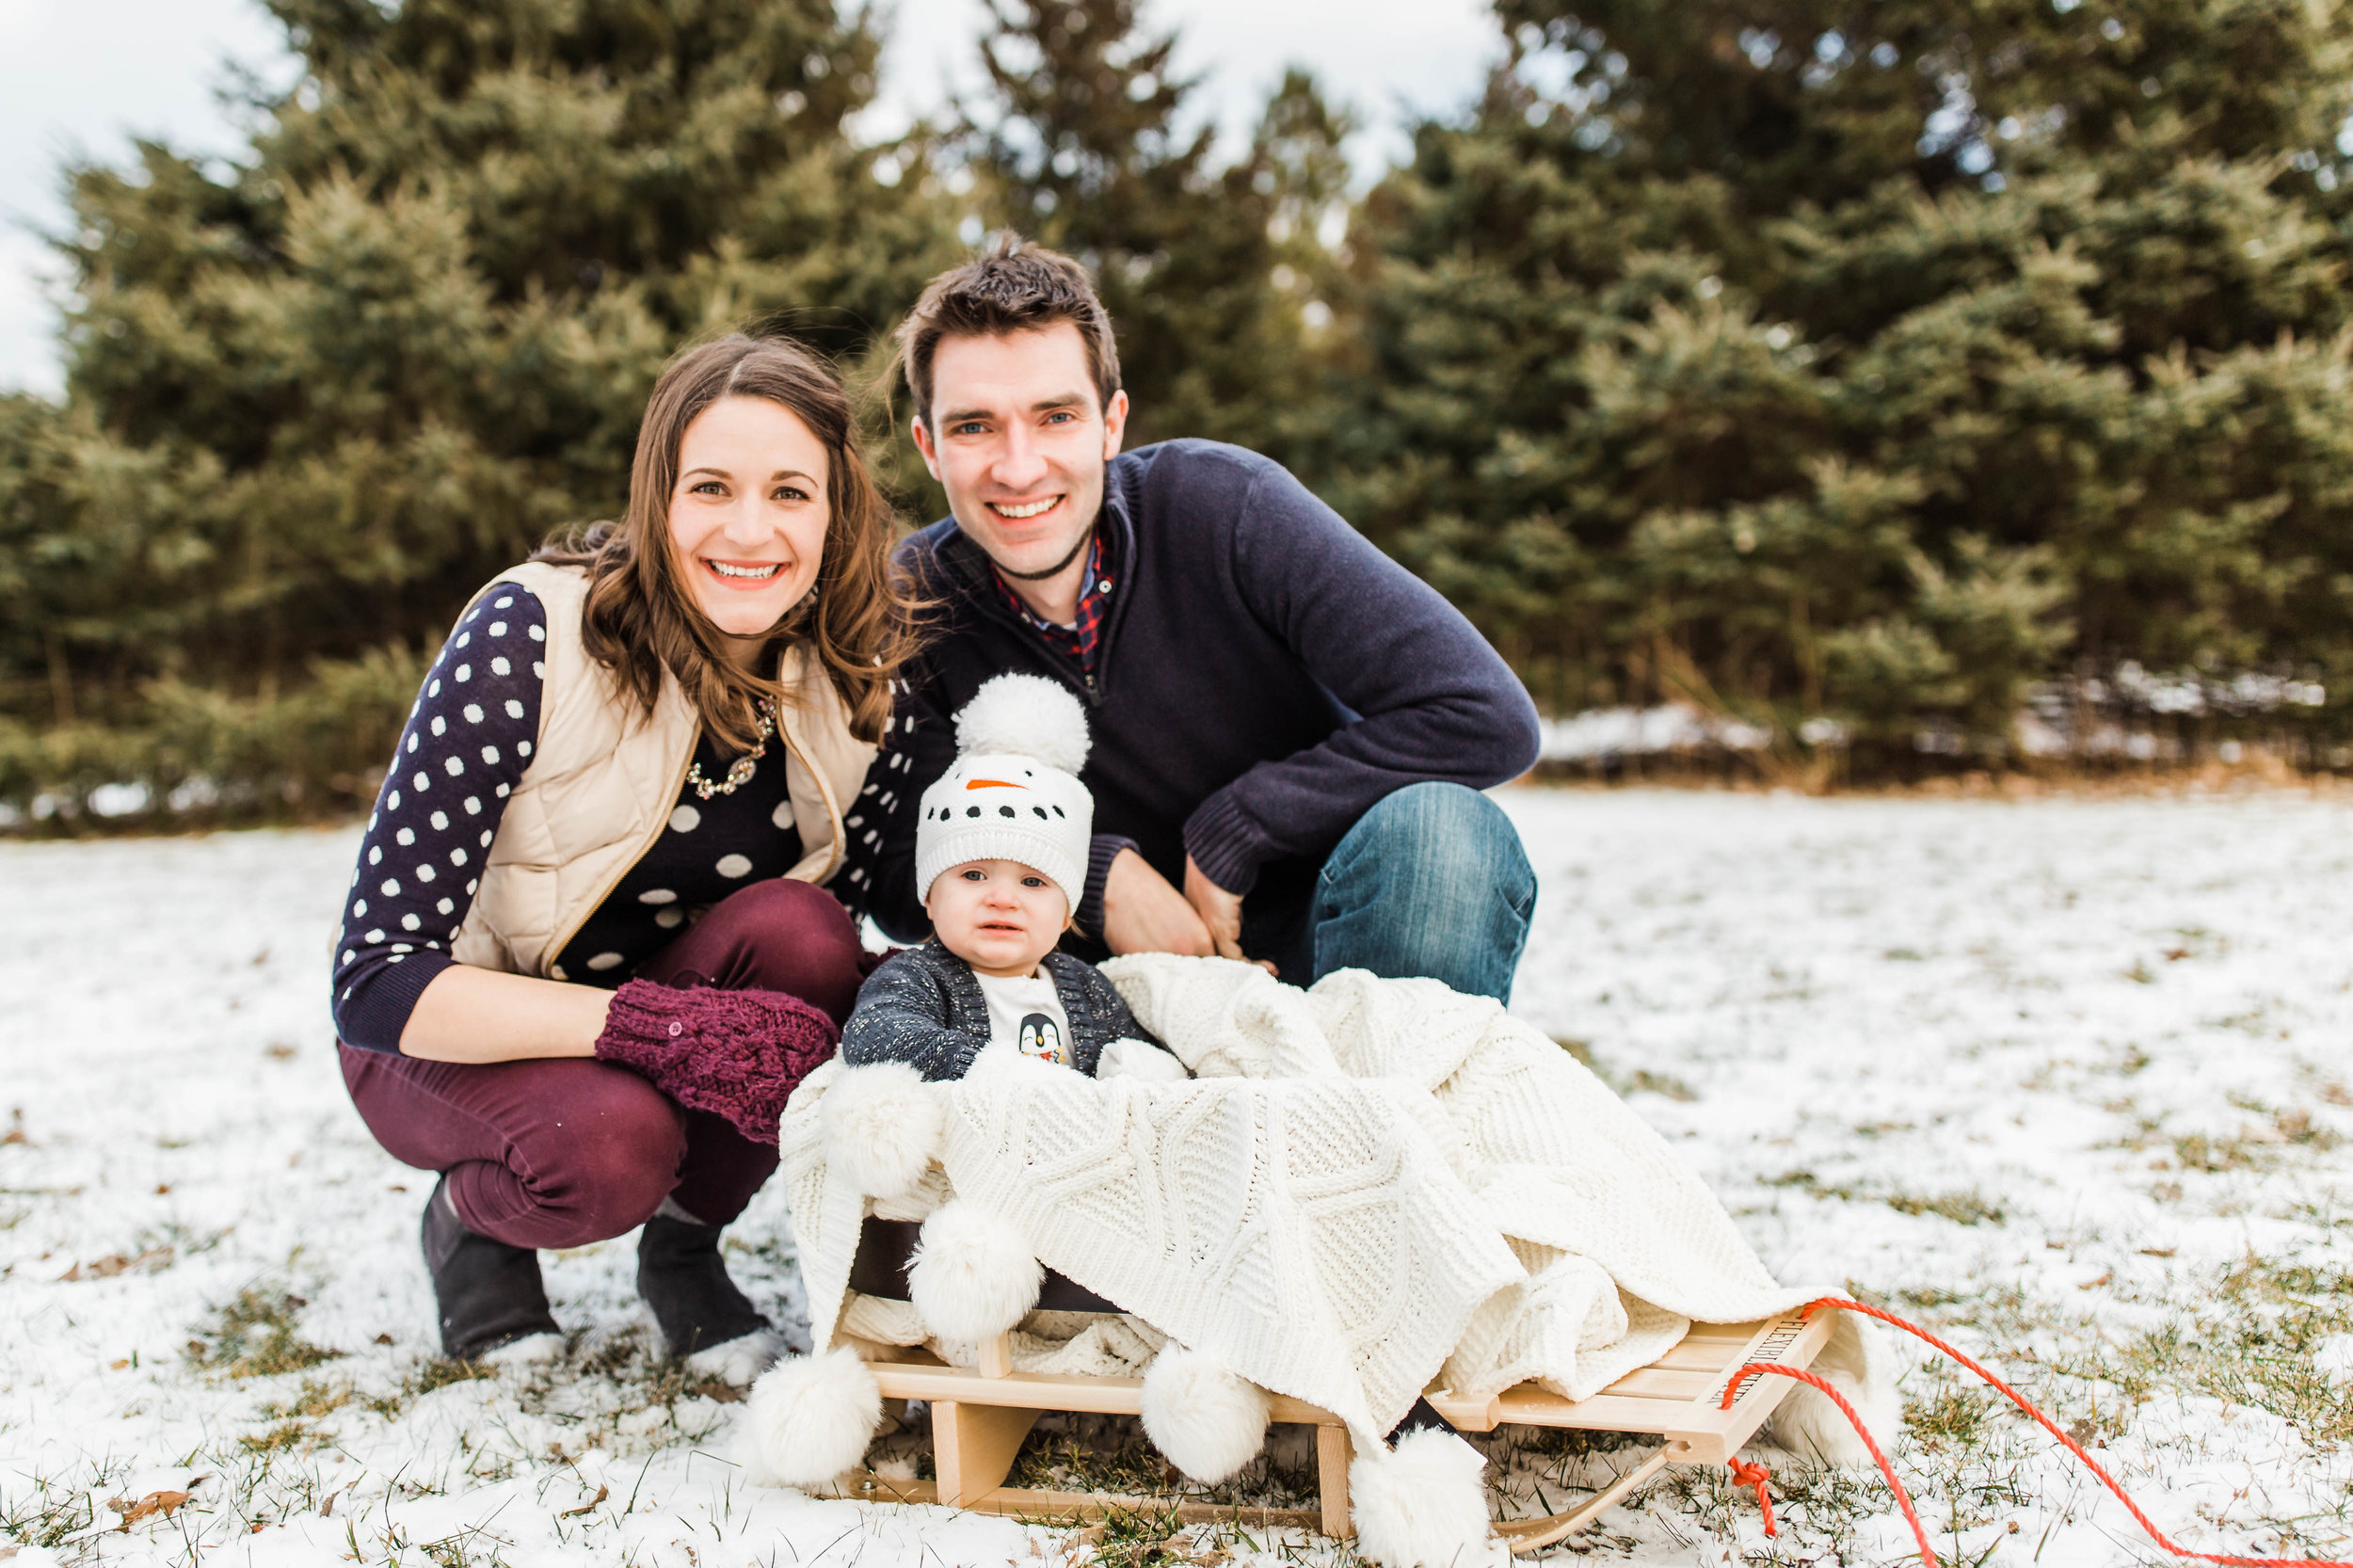 Our family photo session, December 2017. Photo by: Talia Laird Photography